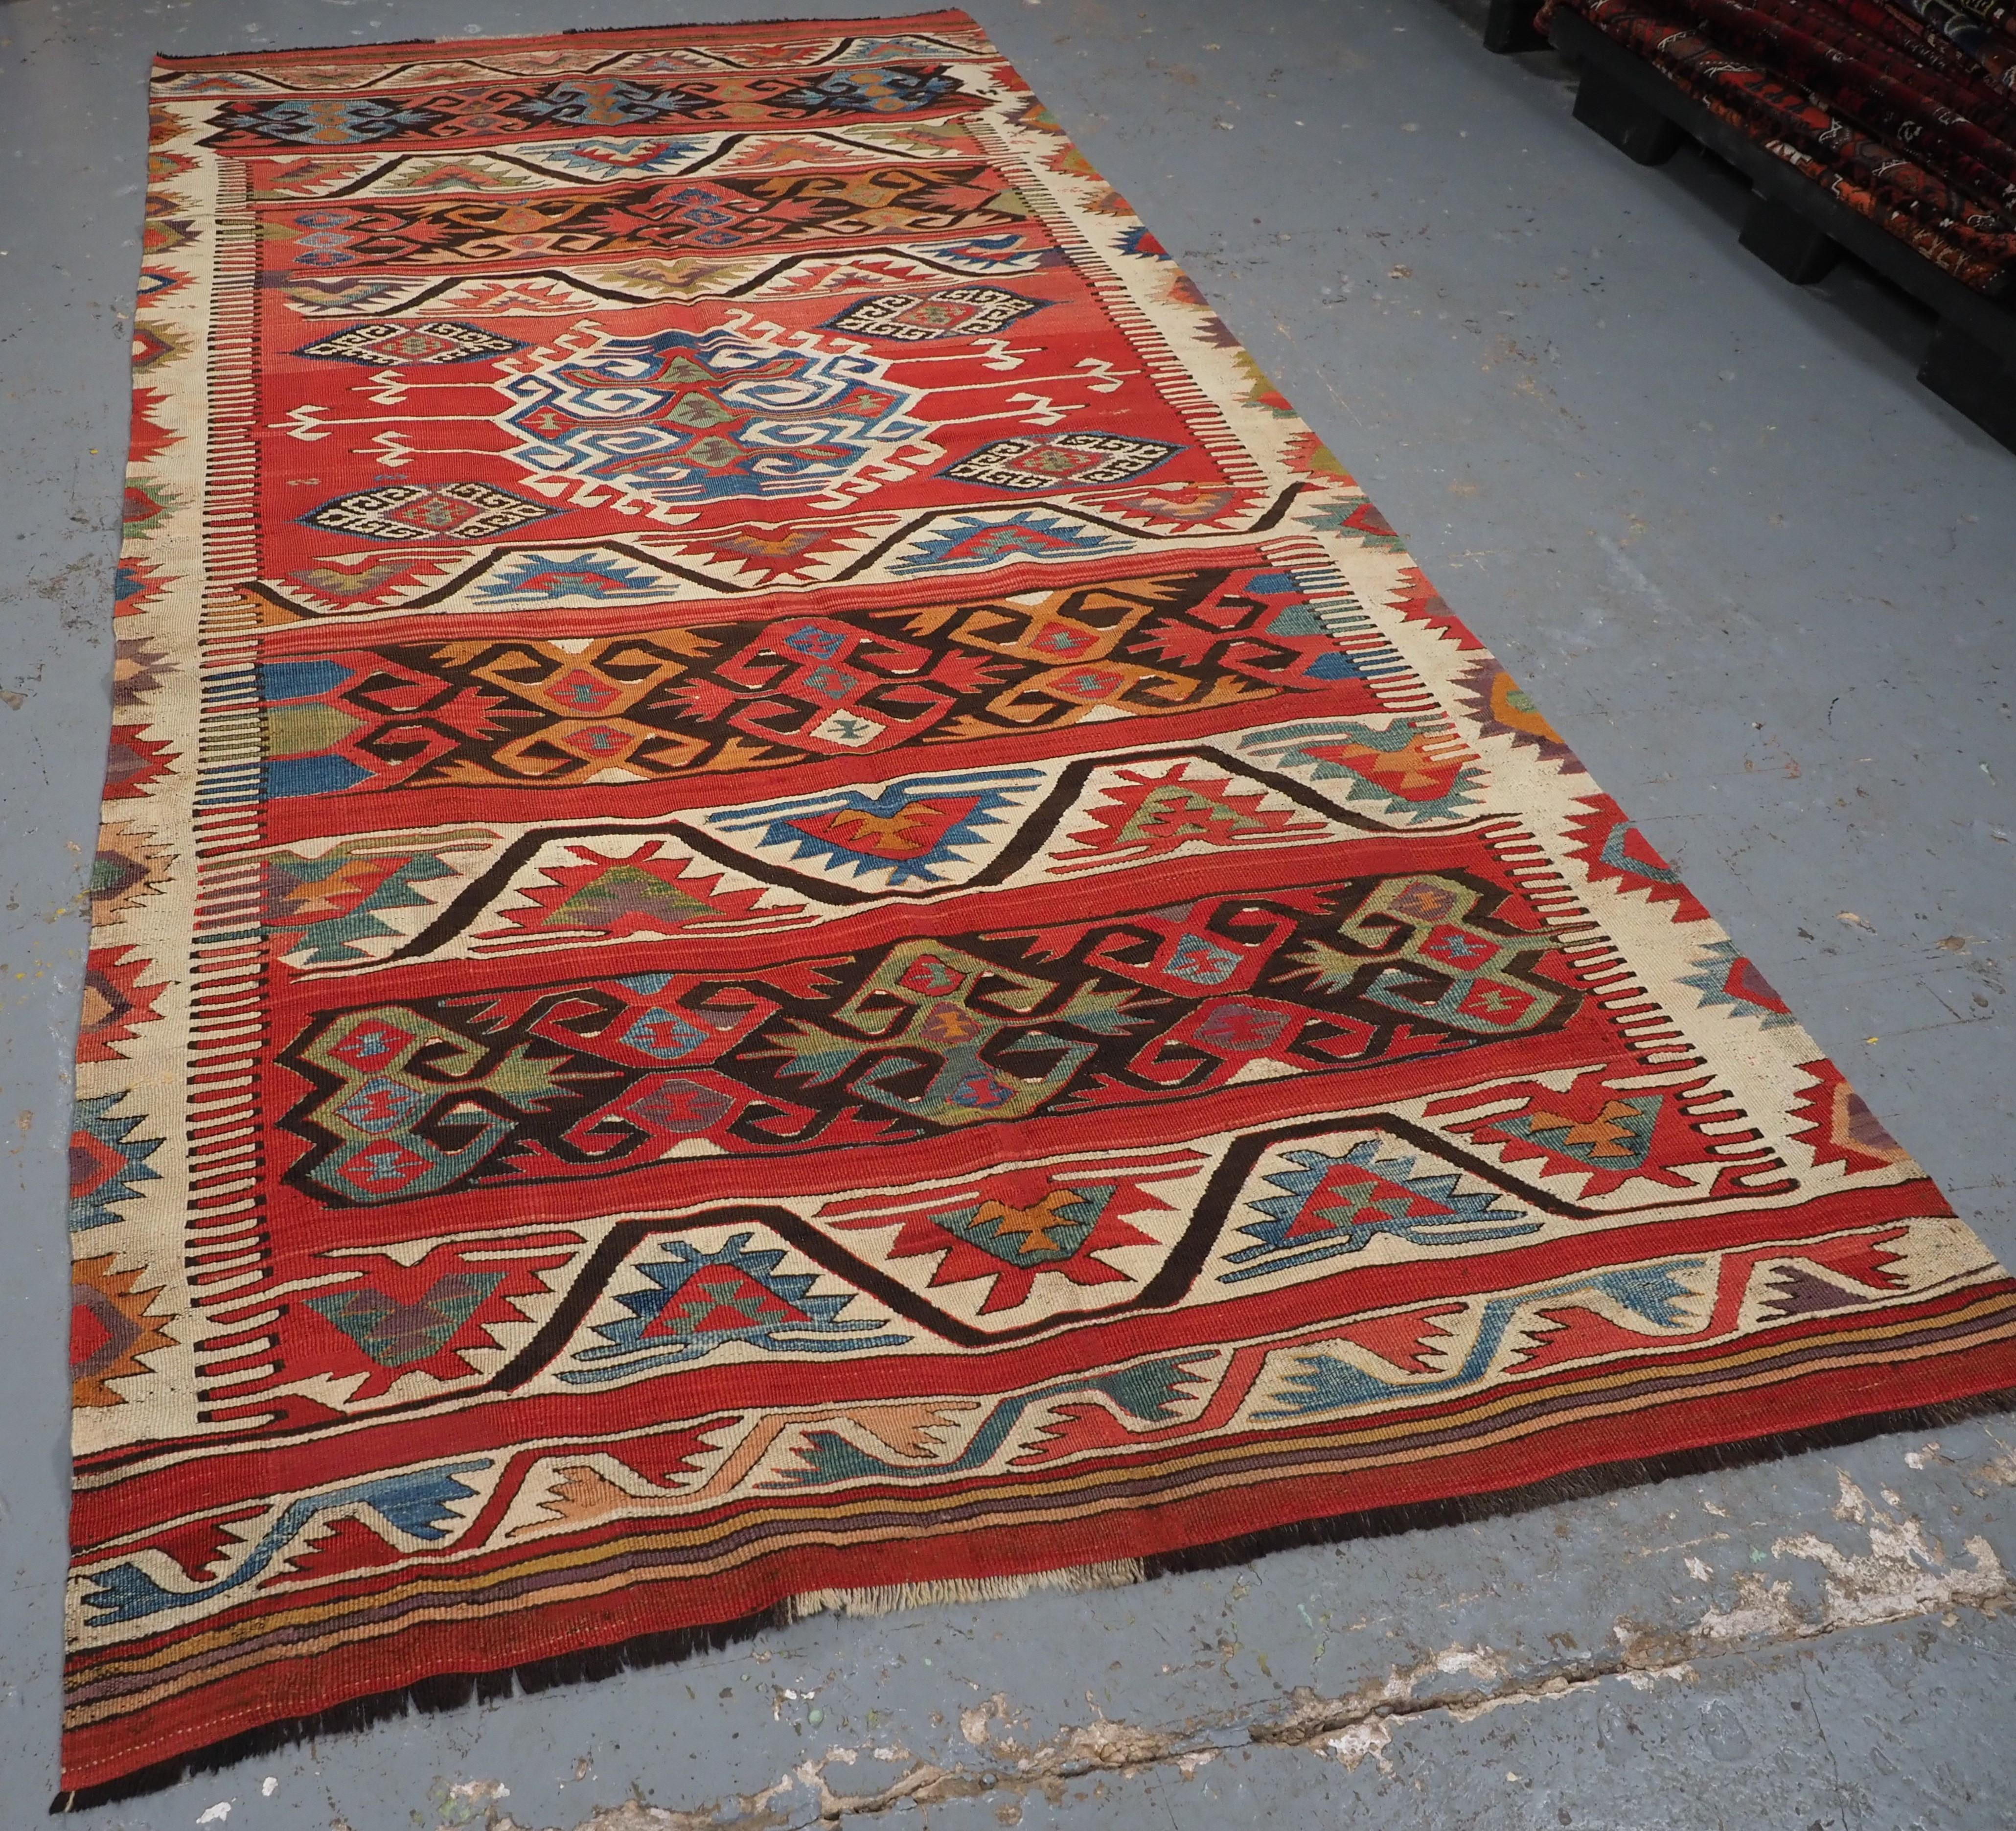 Size: 9ft 4in x 4ft 9in (285 x 146cm).

Antique Anatolian village kilim from the Mut region of South West Turkey, Taurus Mountains.

Circa 1880 or earlier.

This outstanding kilim is beautifully woven with a wonderful range of colours including soft